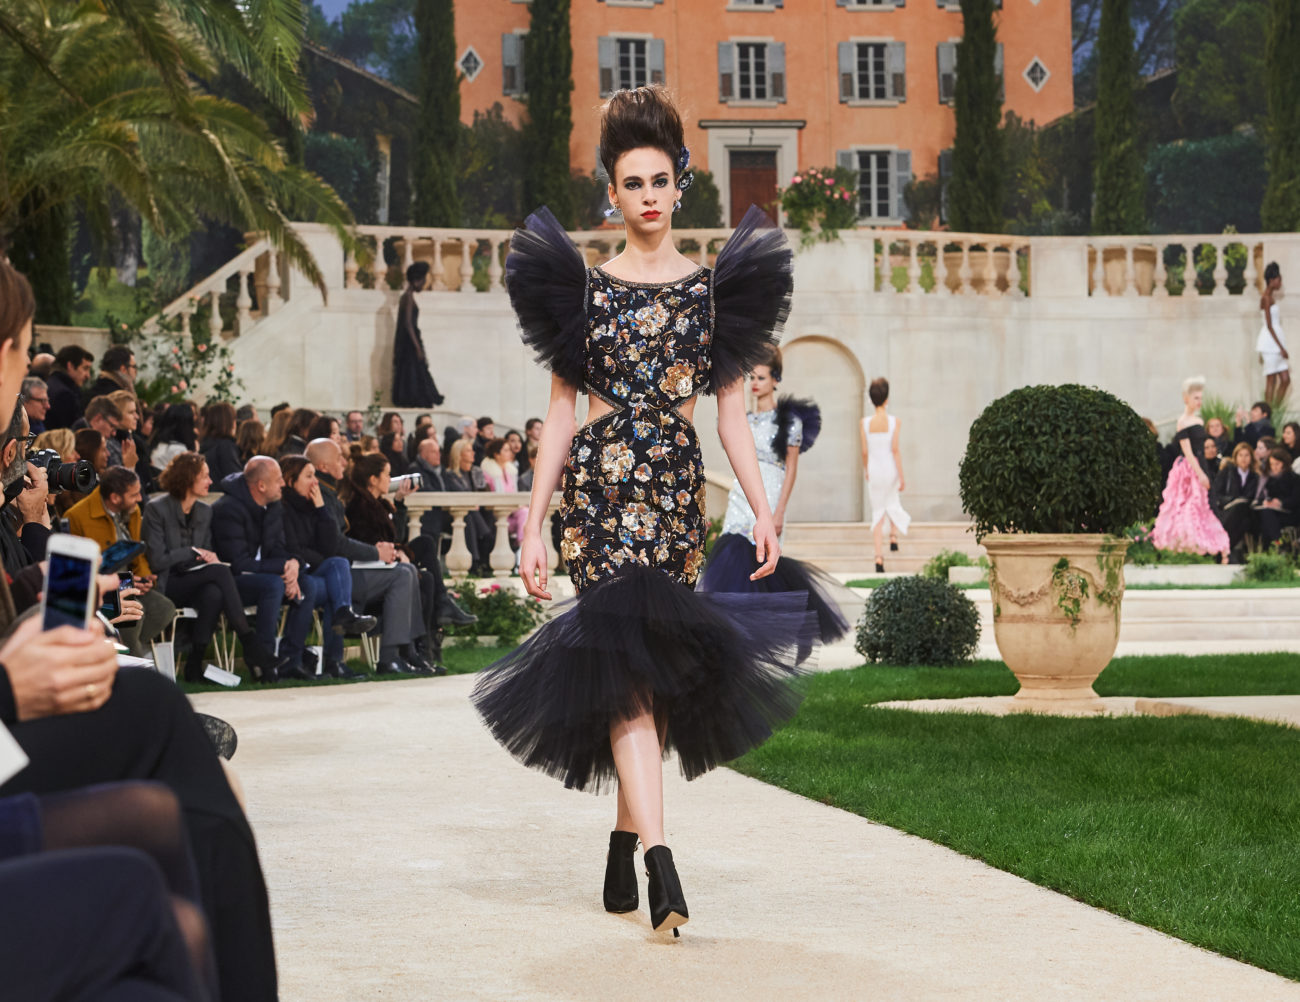 Chanel Spring Summer 2019 Haute Couture Collection, Courtesy of Chanel